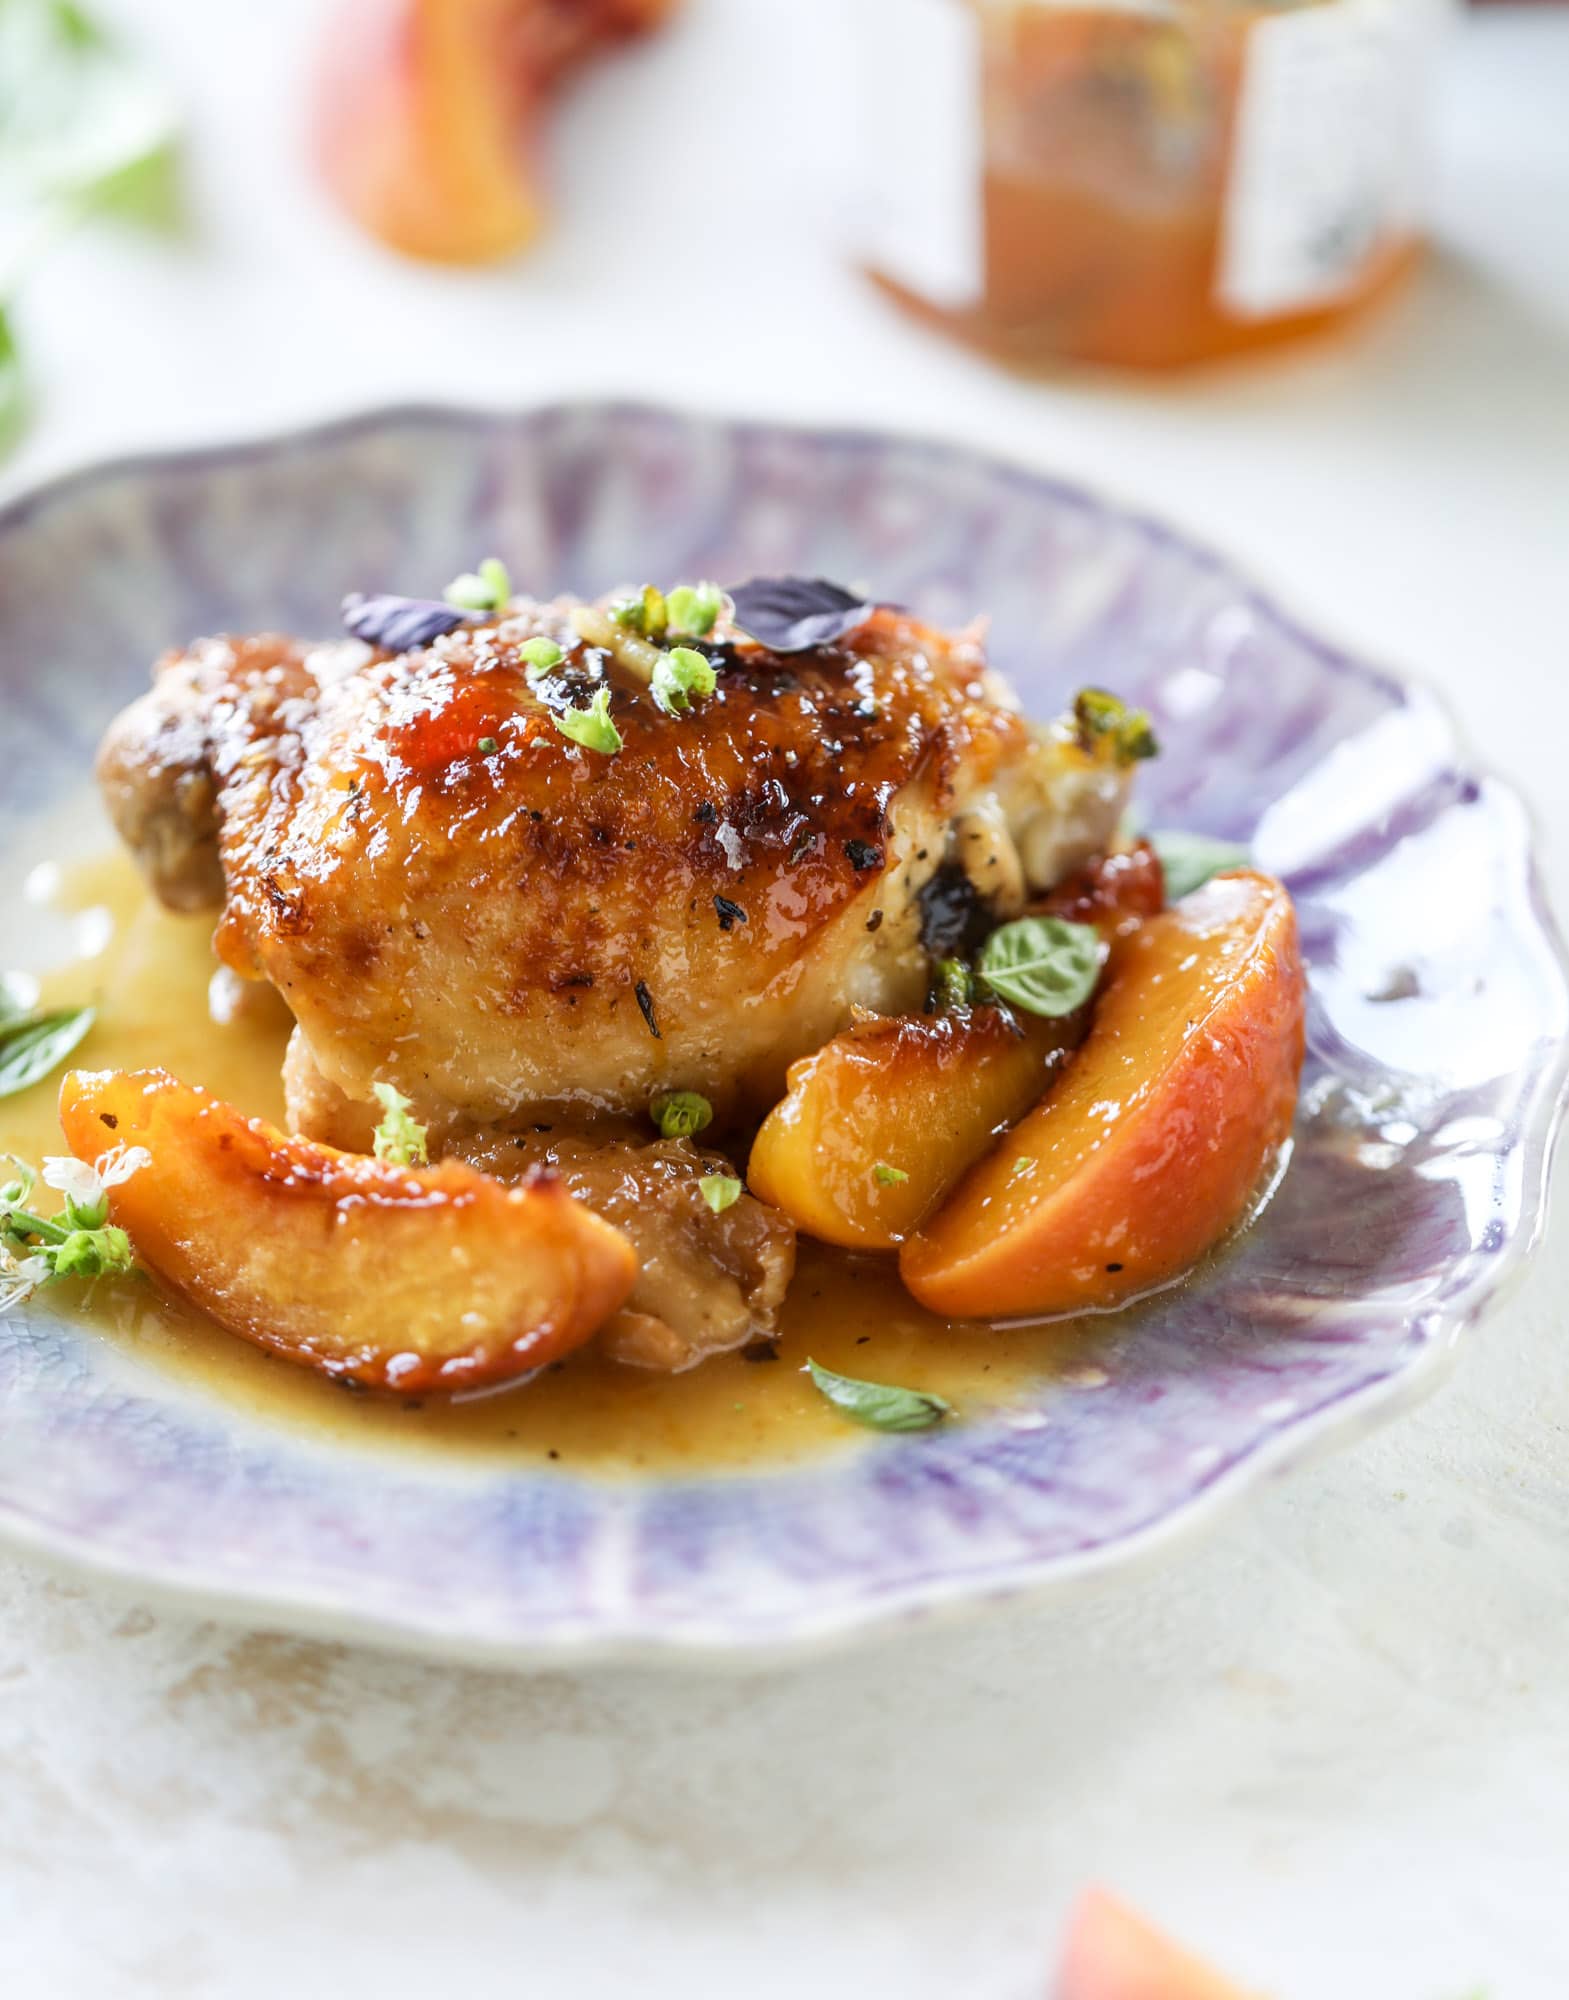 This amazing summertime one pot chicken is made with fresh peaches and basil and takes no time at all. The sweet and savory combination is perfect for a quick weeknight meal; the sauce is amazing for dipping and the chicken is flavorful as can be. I howsweeteats.com #chicken #peach #basil #easy #dinner #recipe #summer #healthy